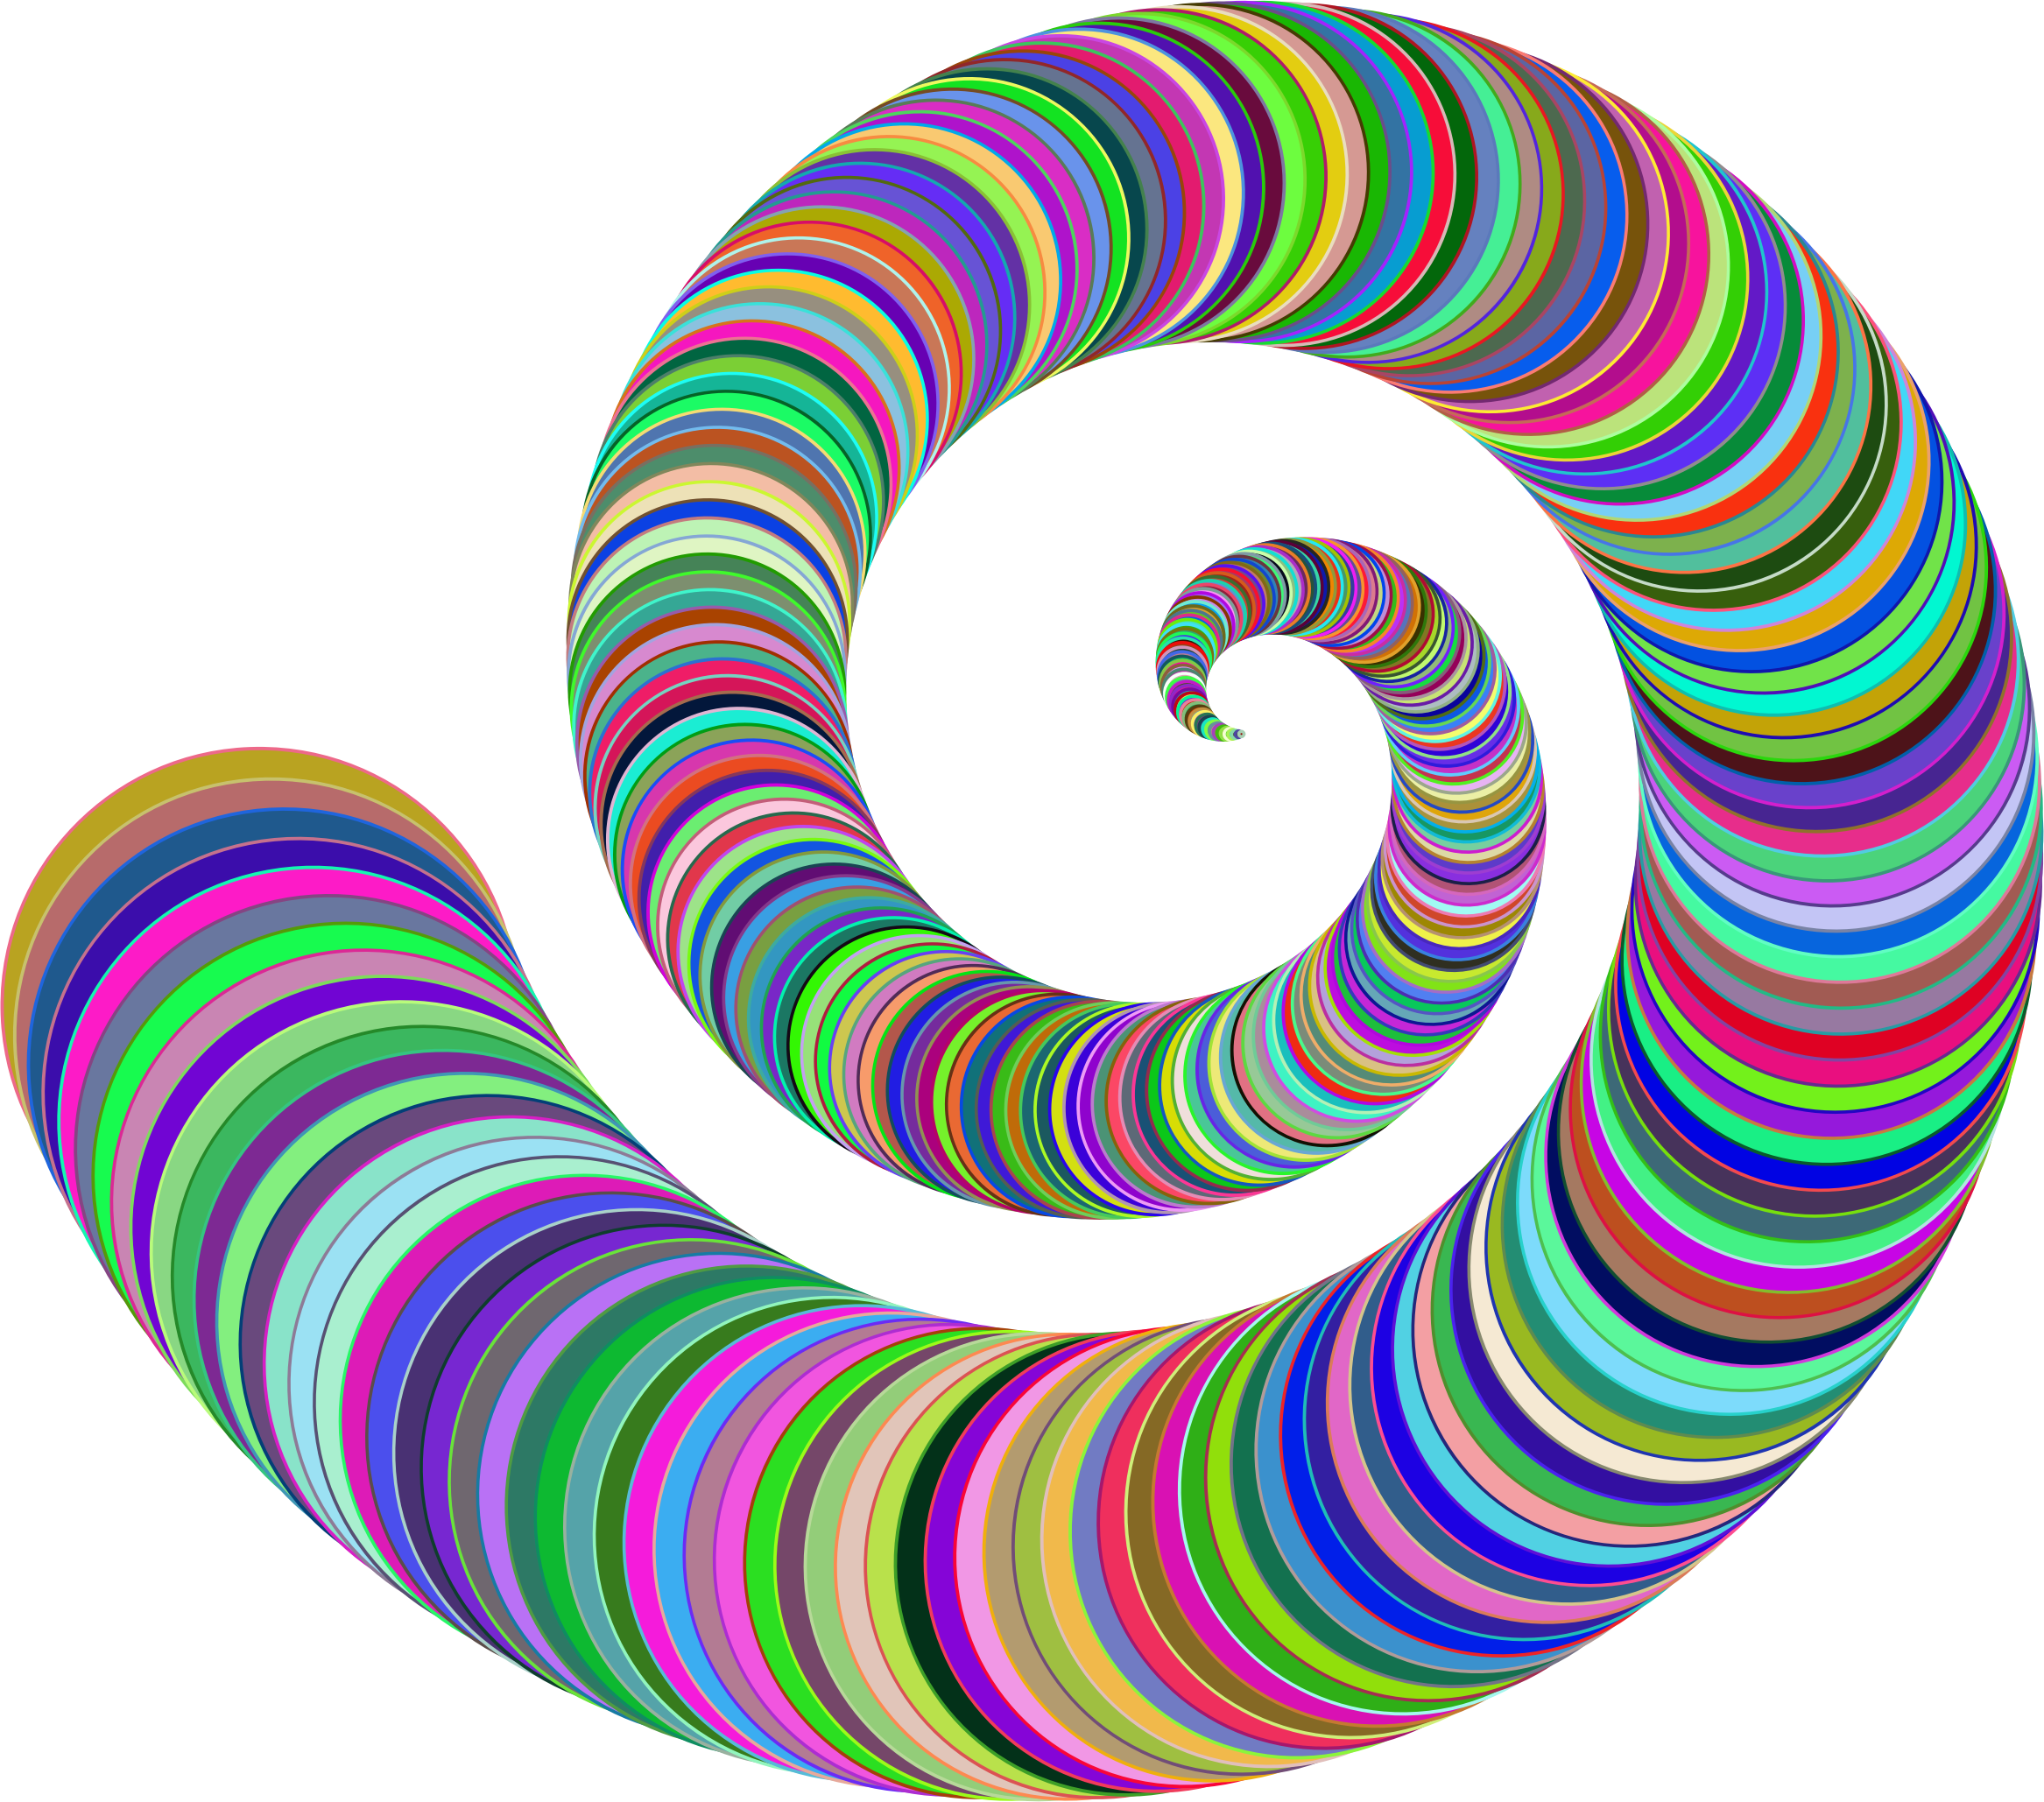 Worm clipart rainbow. Prismatic abstract big image